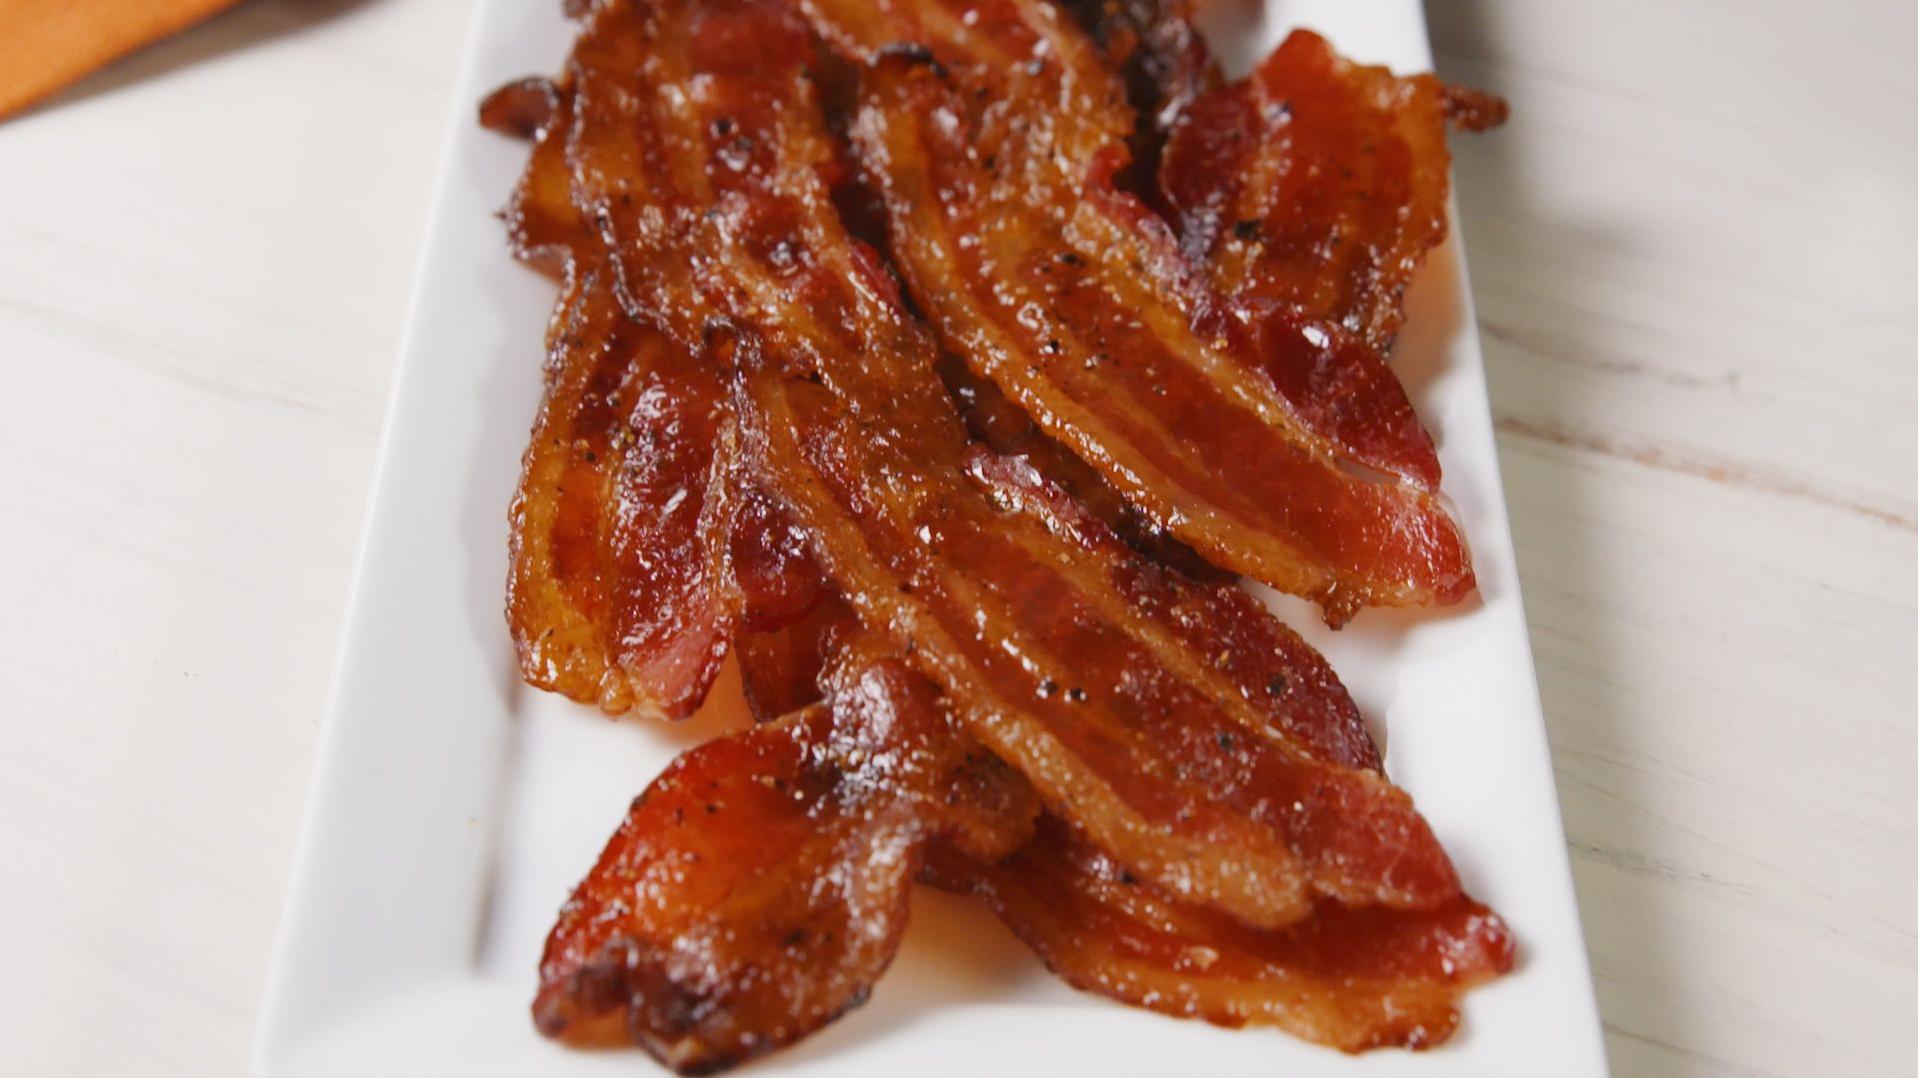  A match made in breakfast heaven: coffee and bacon with a brown sugar twist.